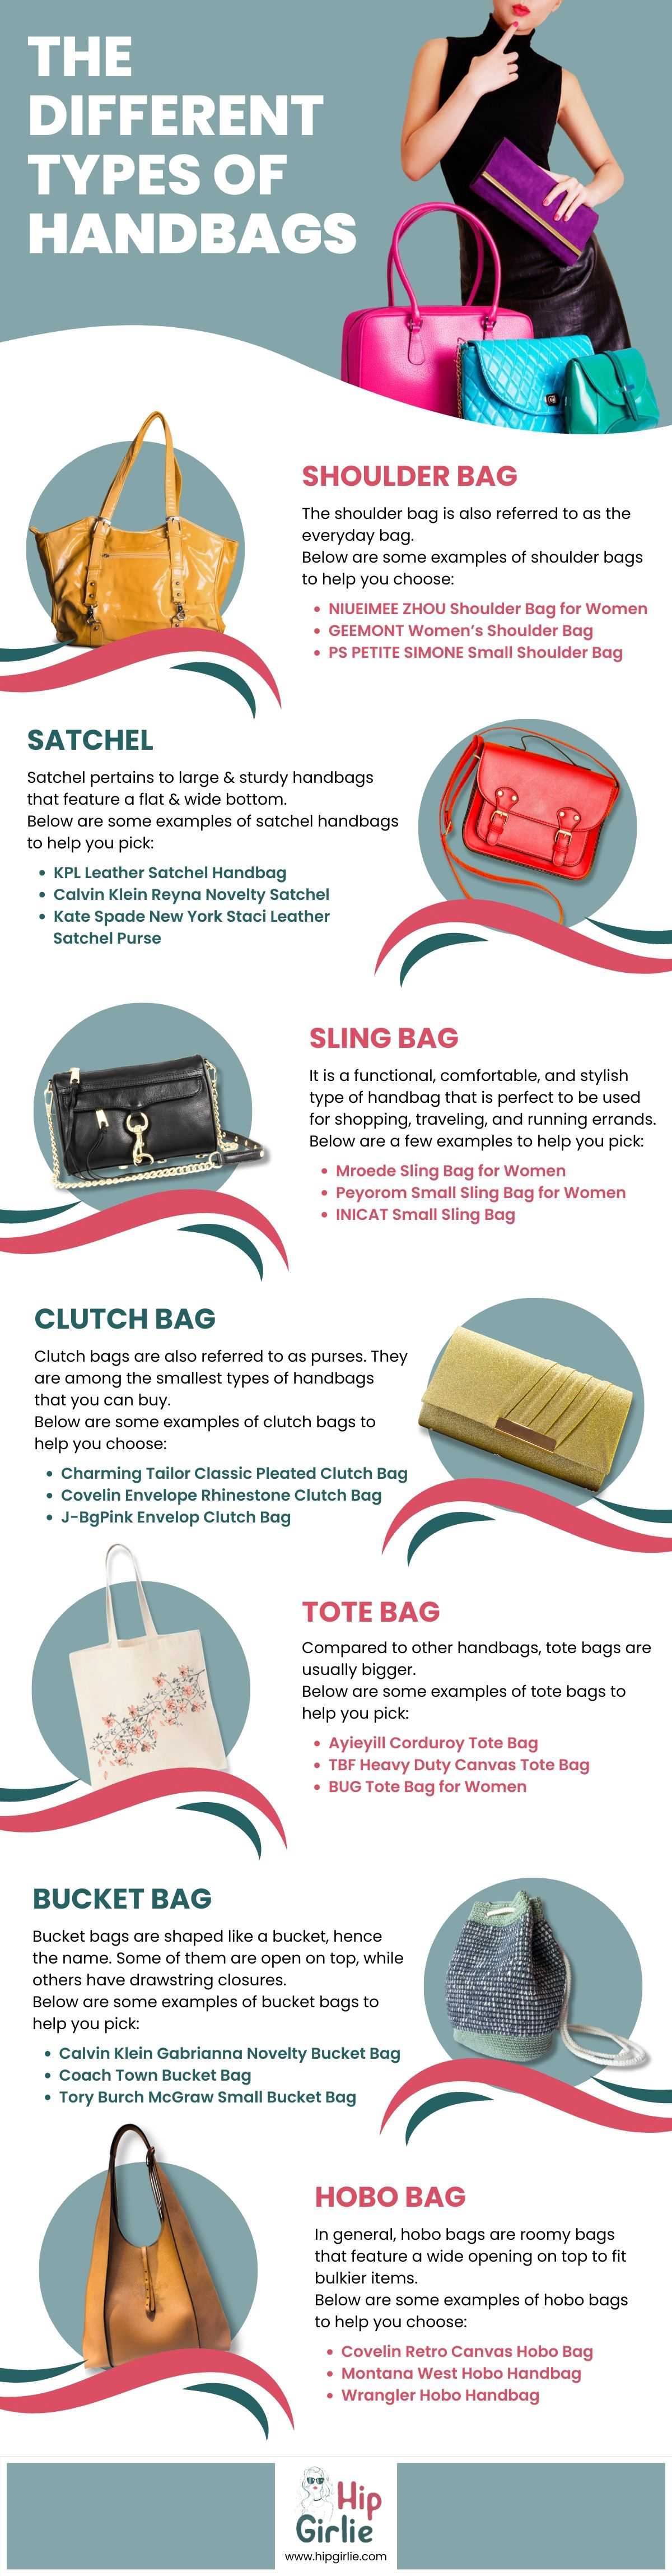 The Different Types of Handbags